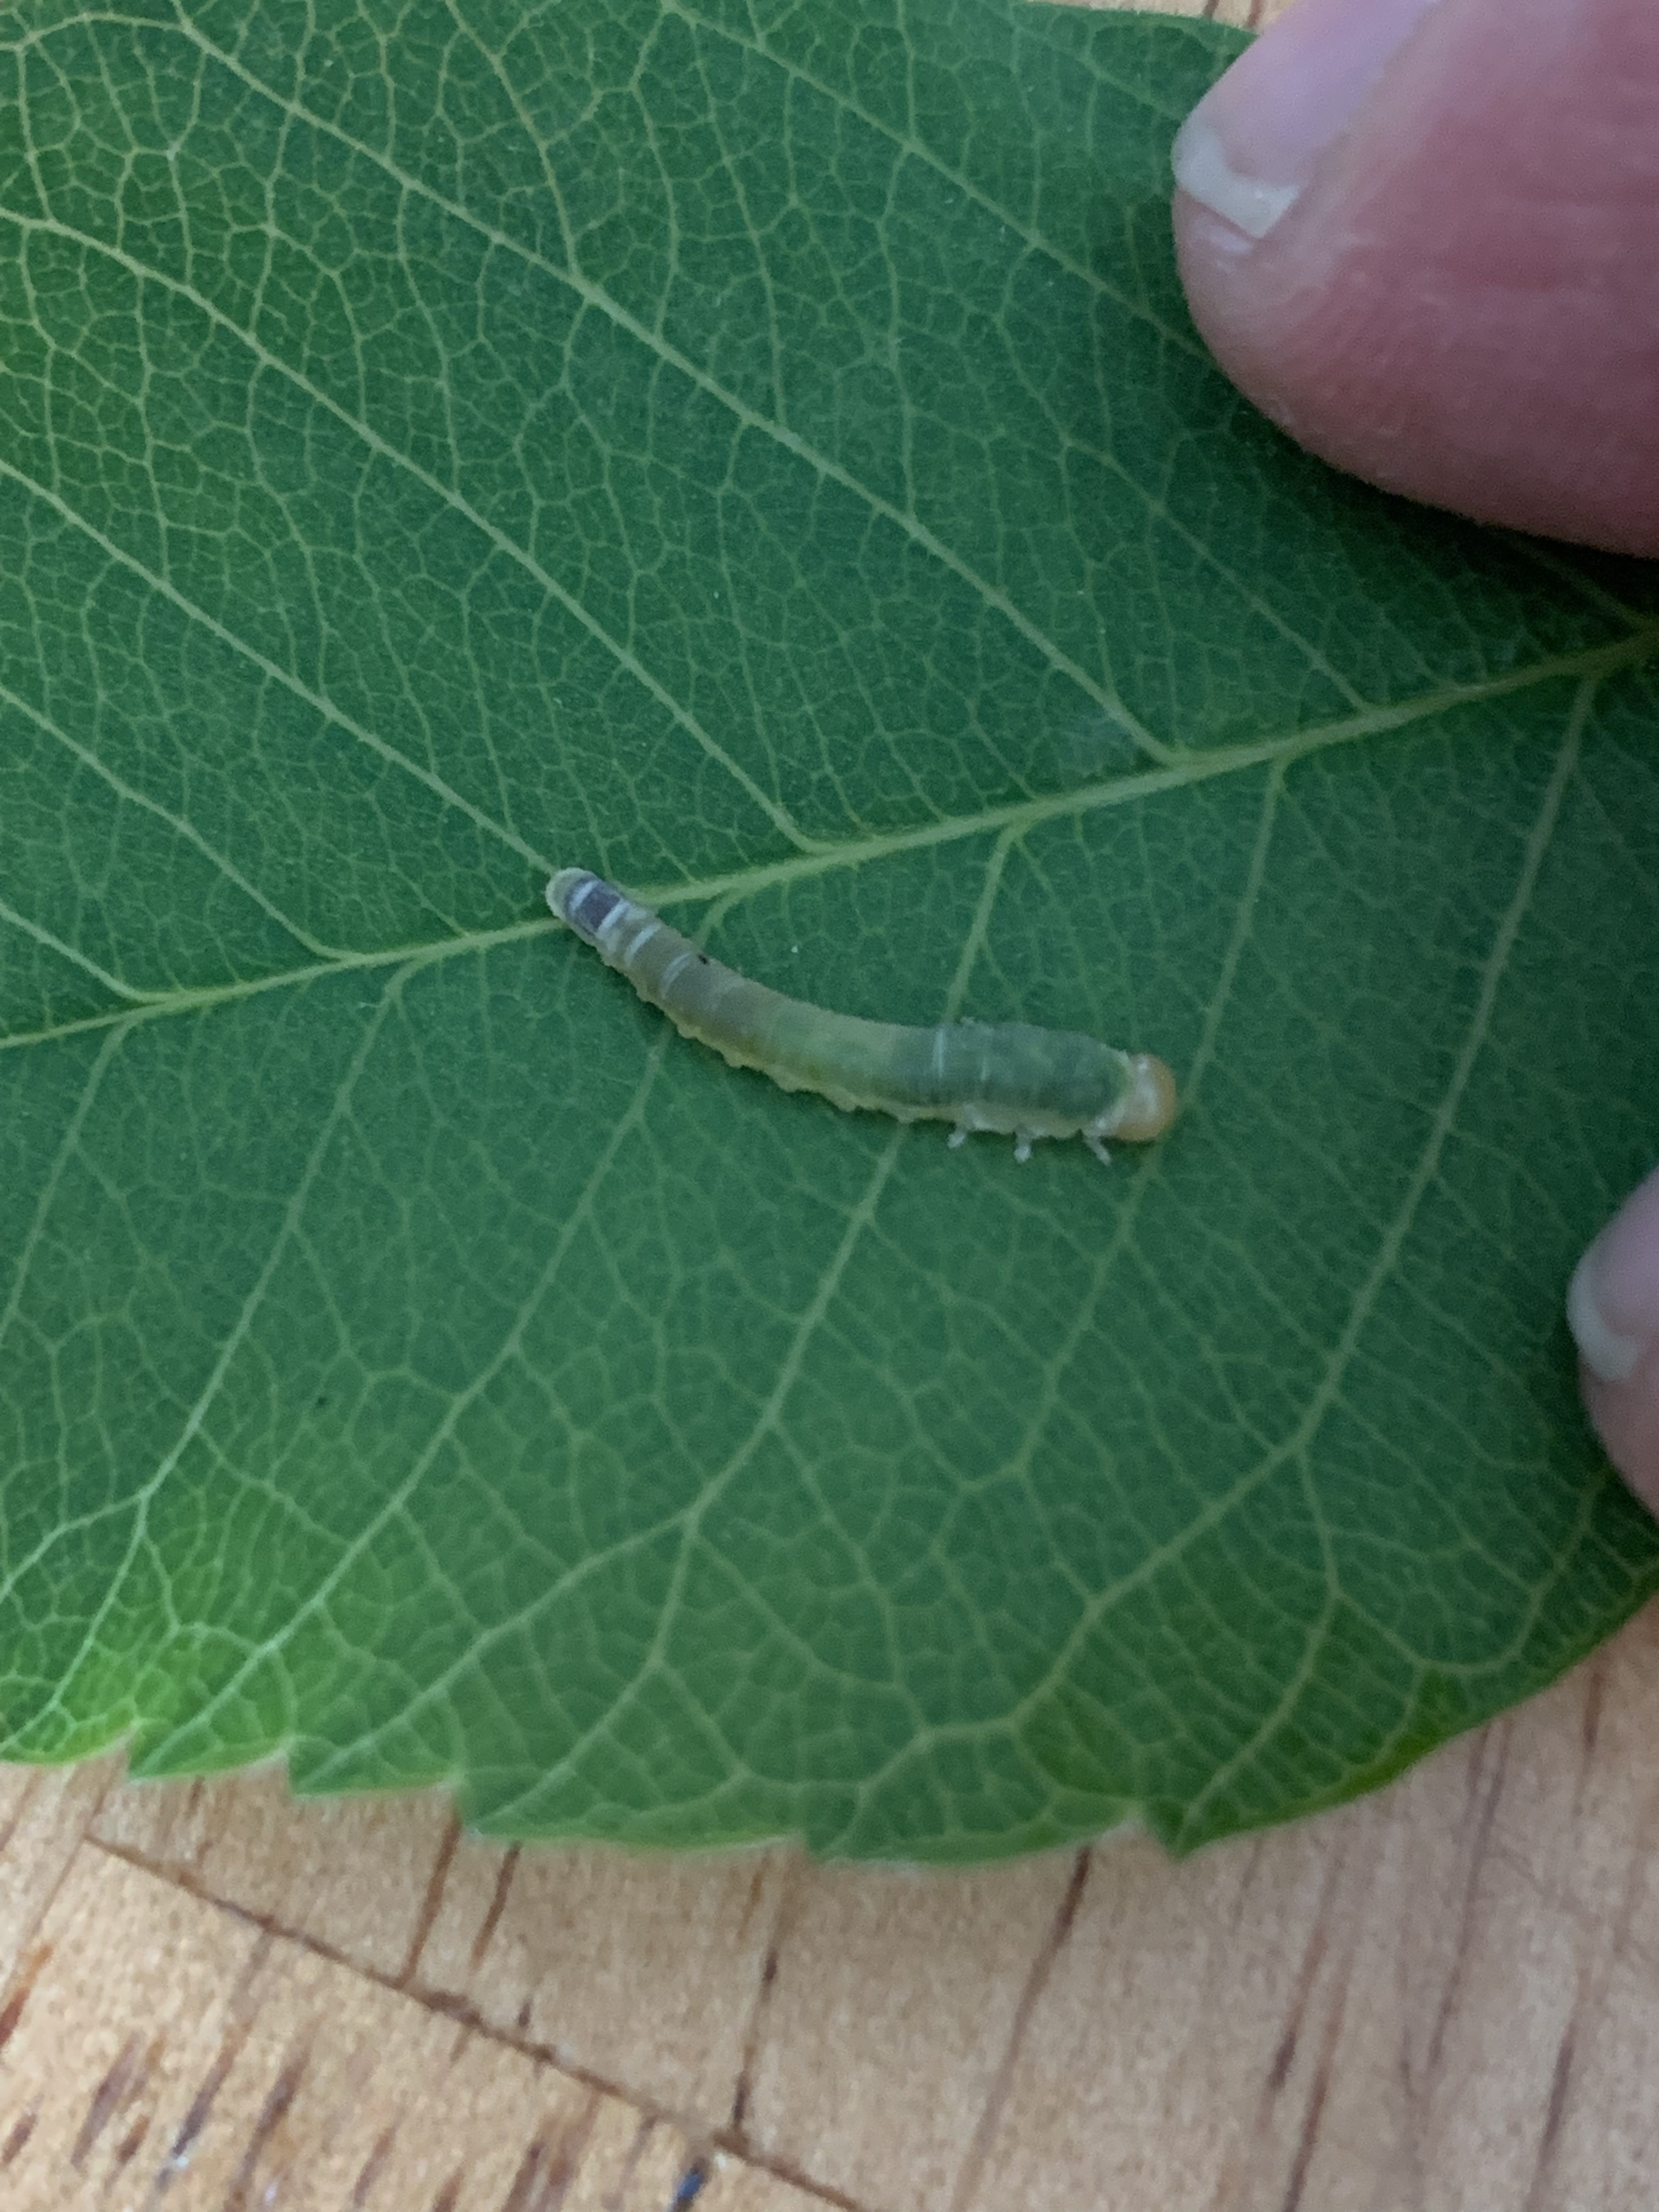 Small green worms eating my vegetation. - Ask Extension